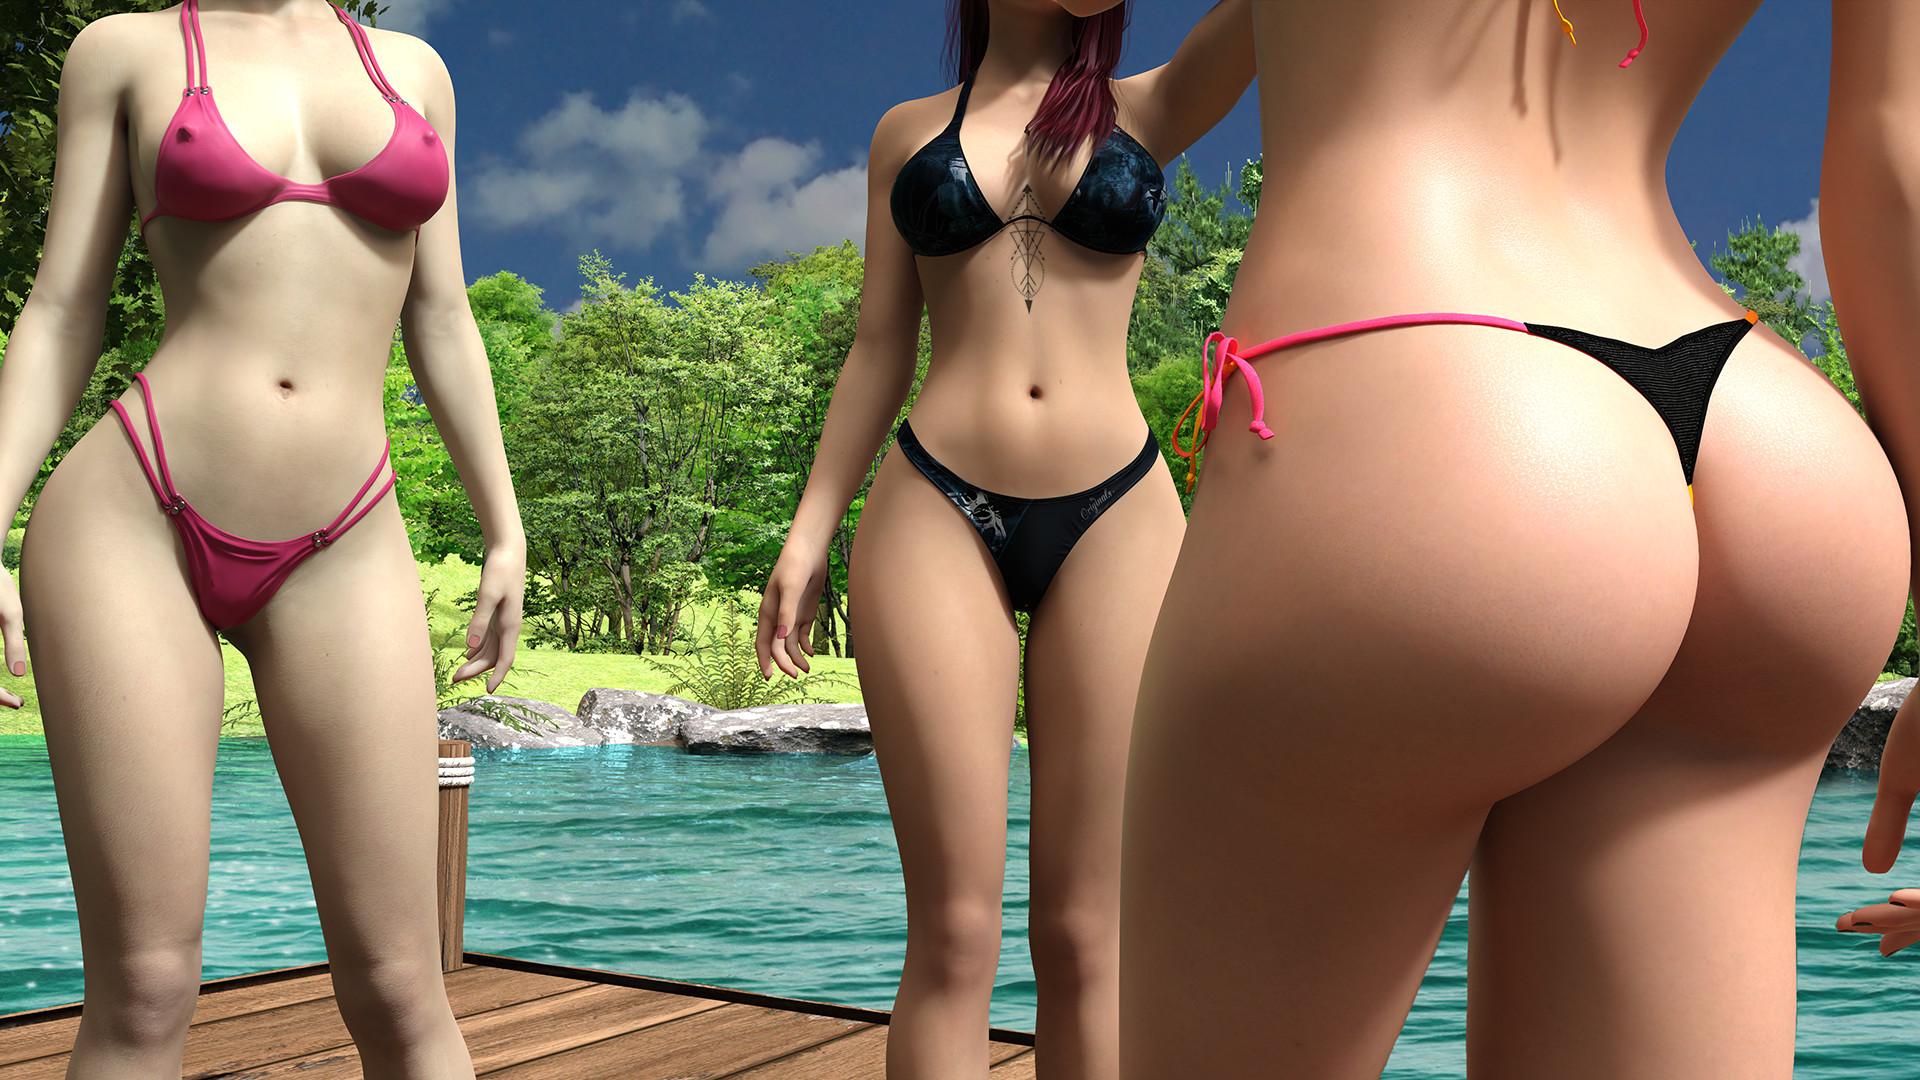 Screenshot №1 from game Helping the Hotties